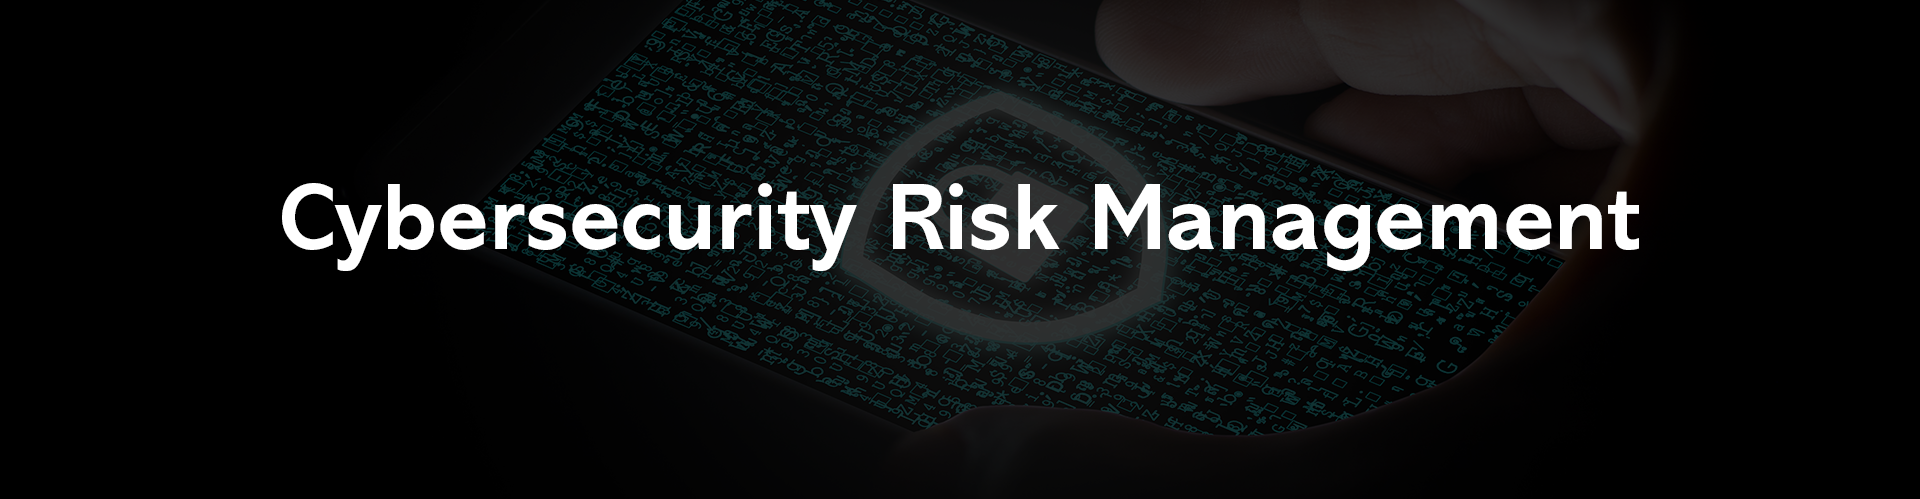 Cybersecurity Risk Management from Grantek